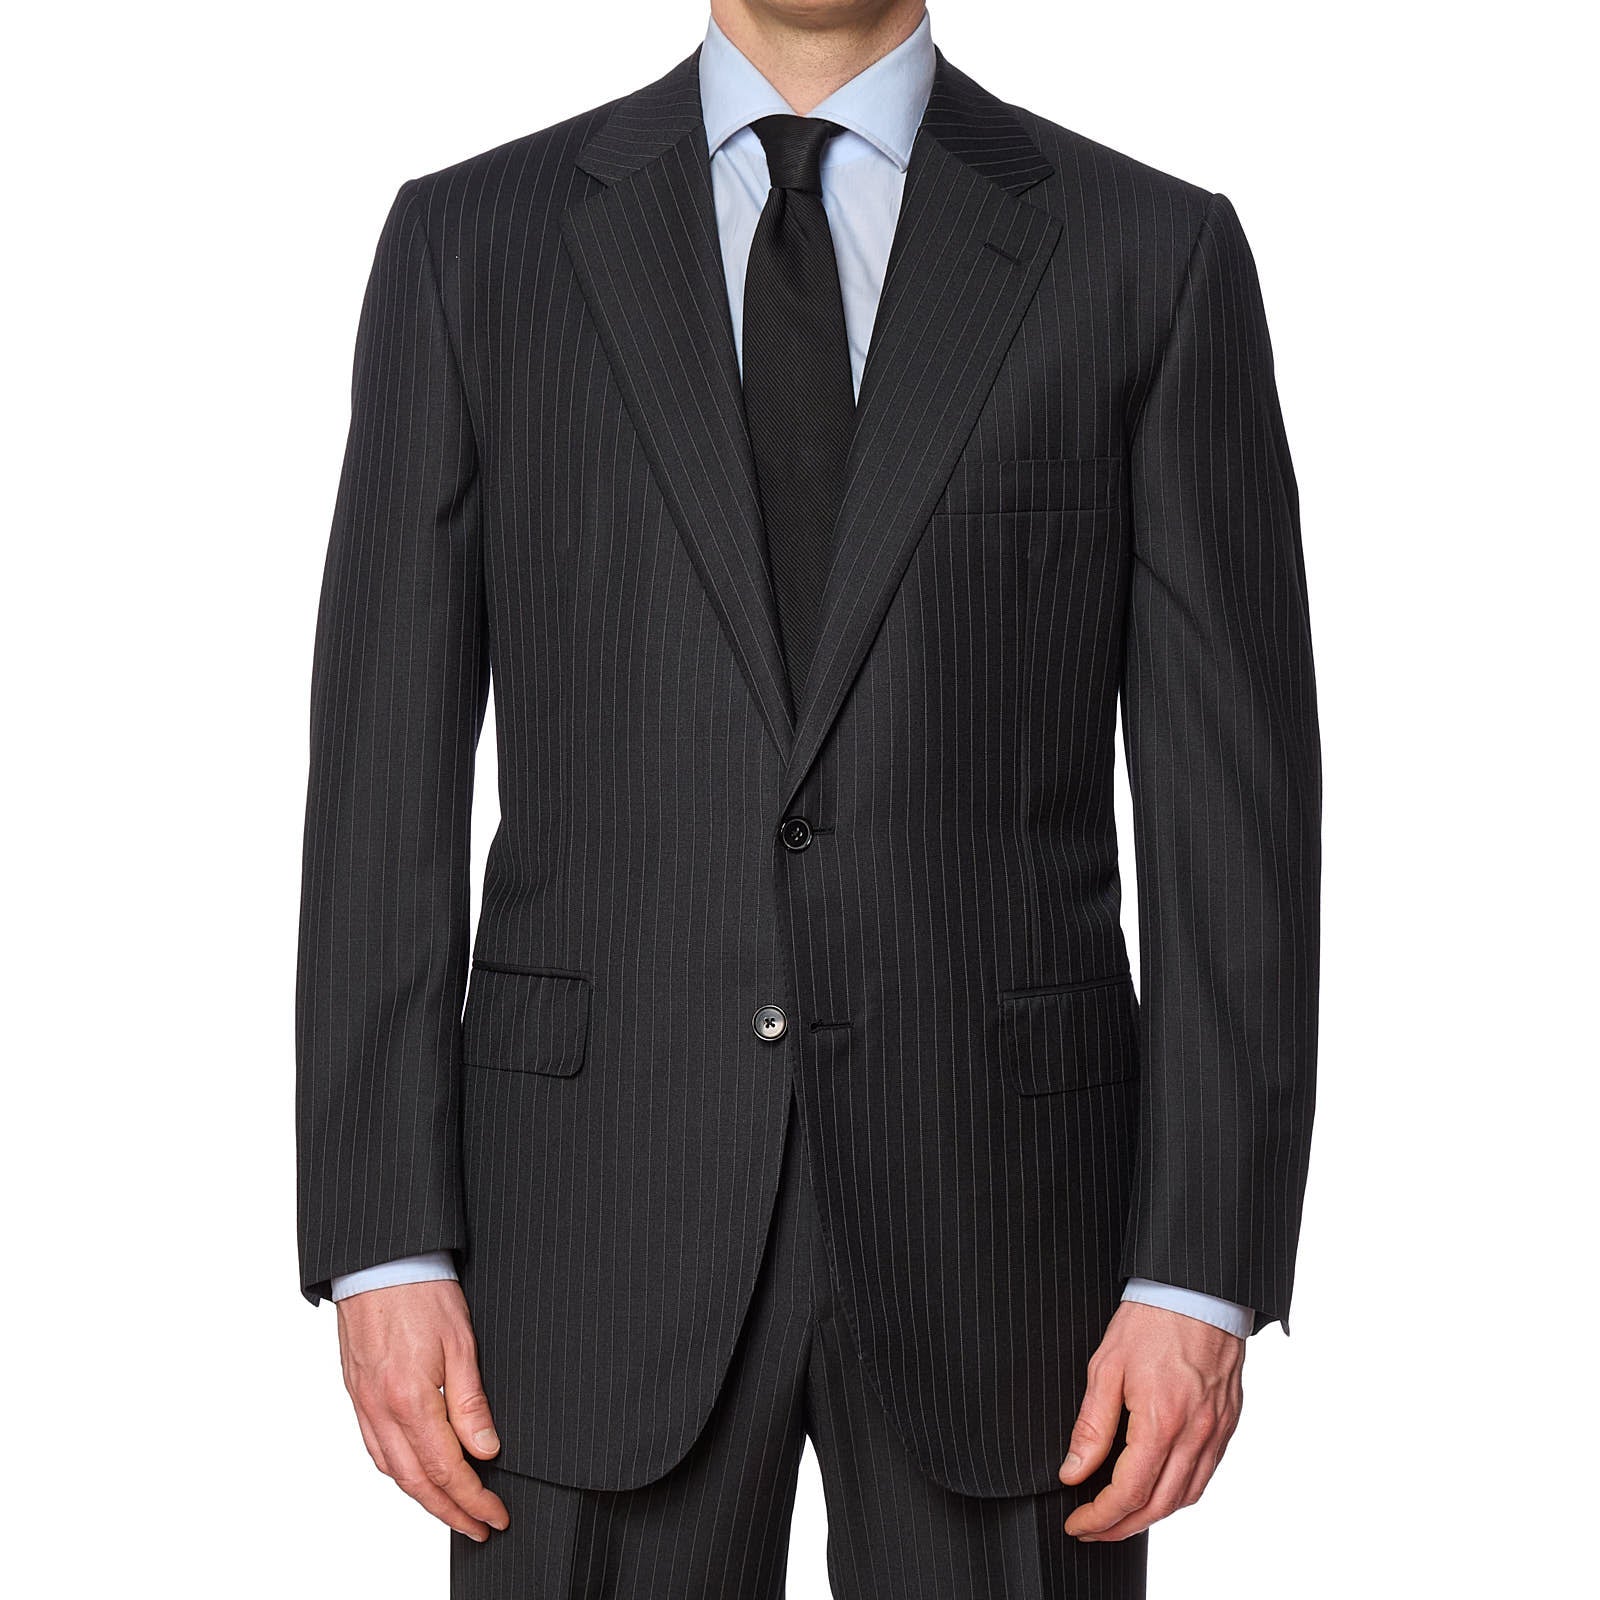 D'AVENZA Handmade Charcoal Gray Pinstriped Wool Suit EU 54 NEW US 42-44